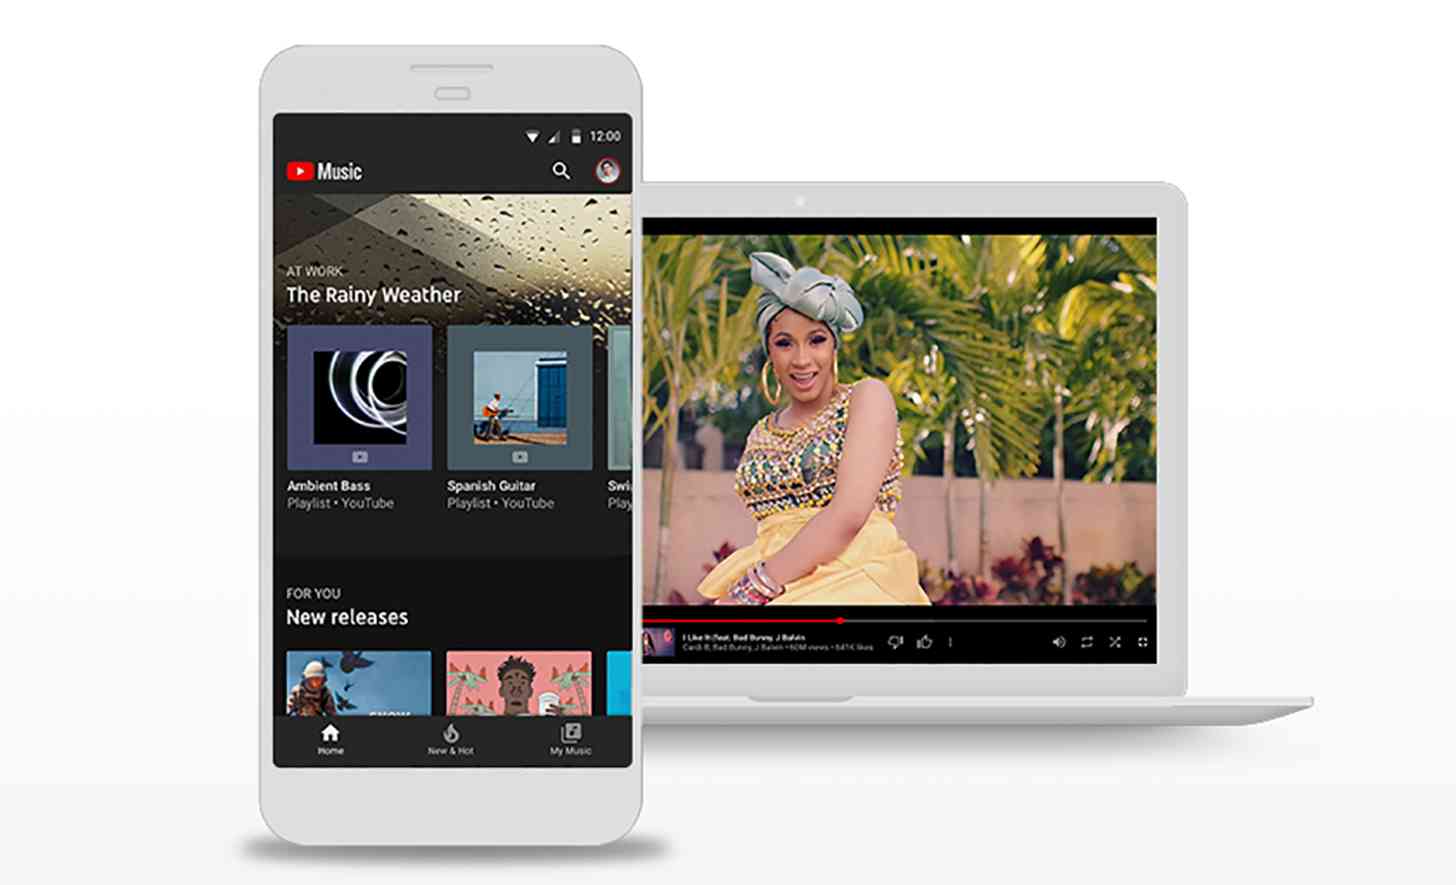 YouTube Music apps